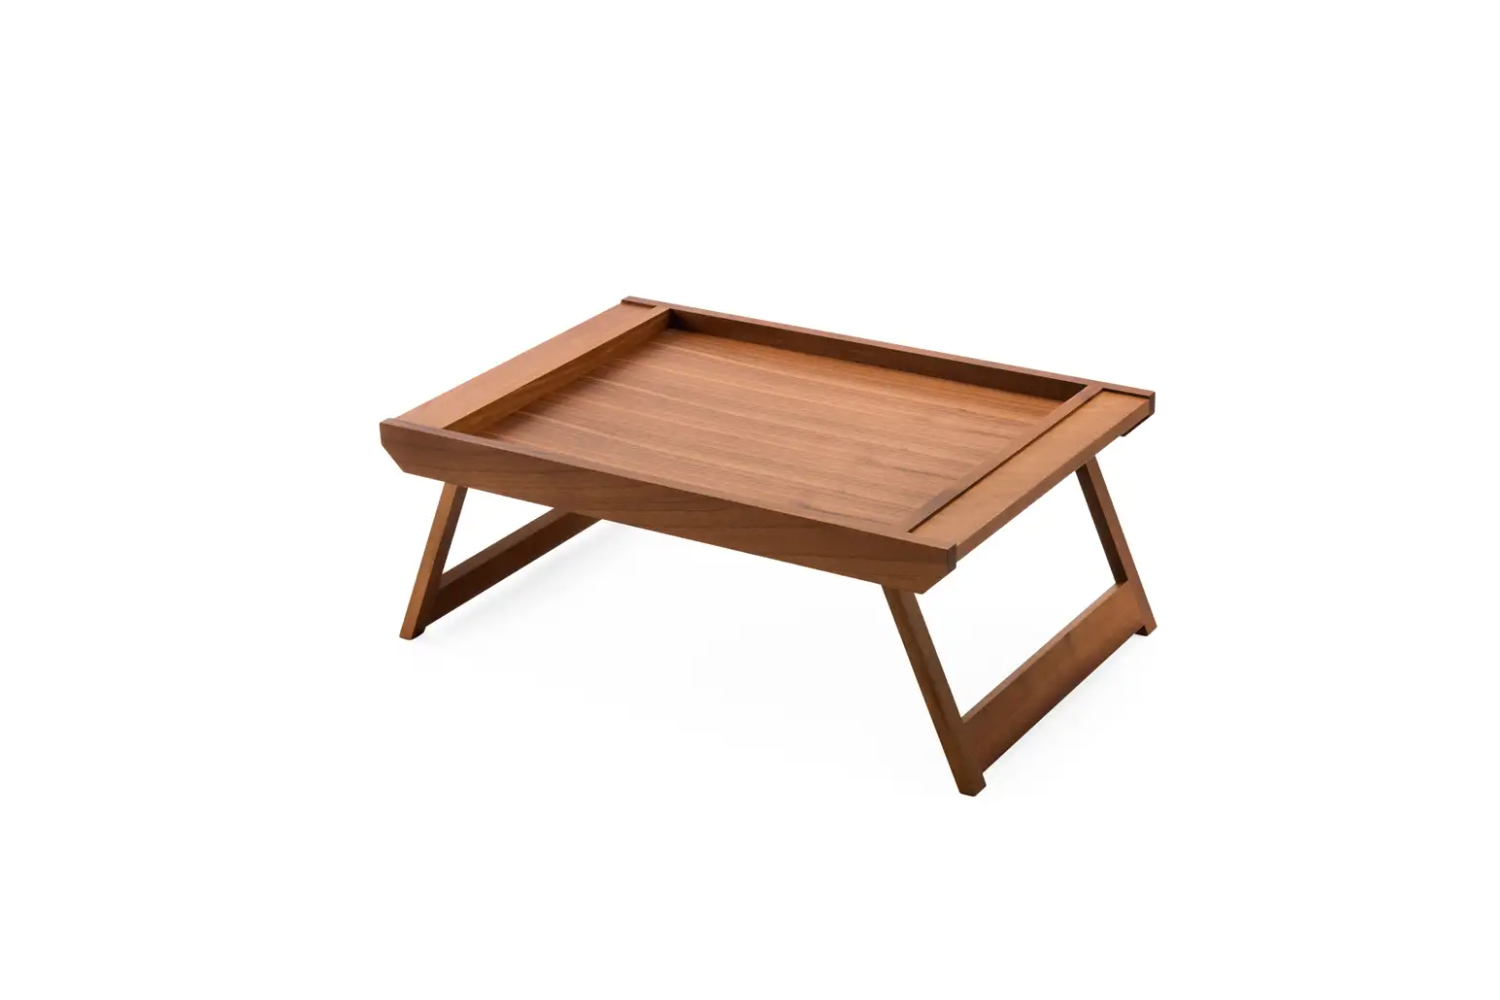 from manufactum in germany, the bed tray is made of oiled walnut wood from slov 13